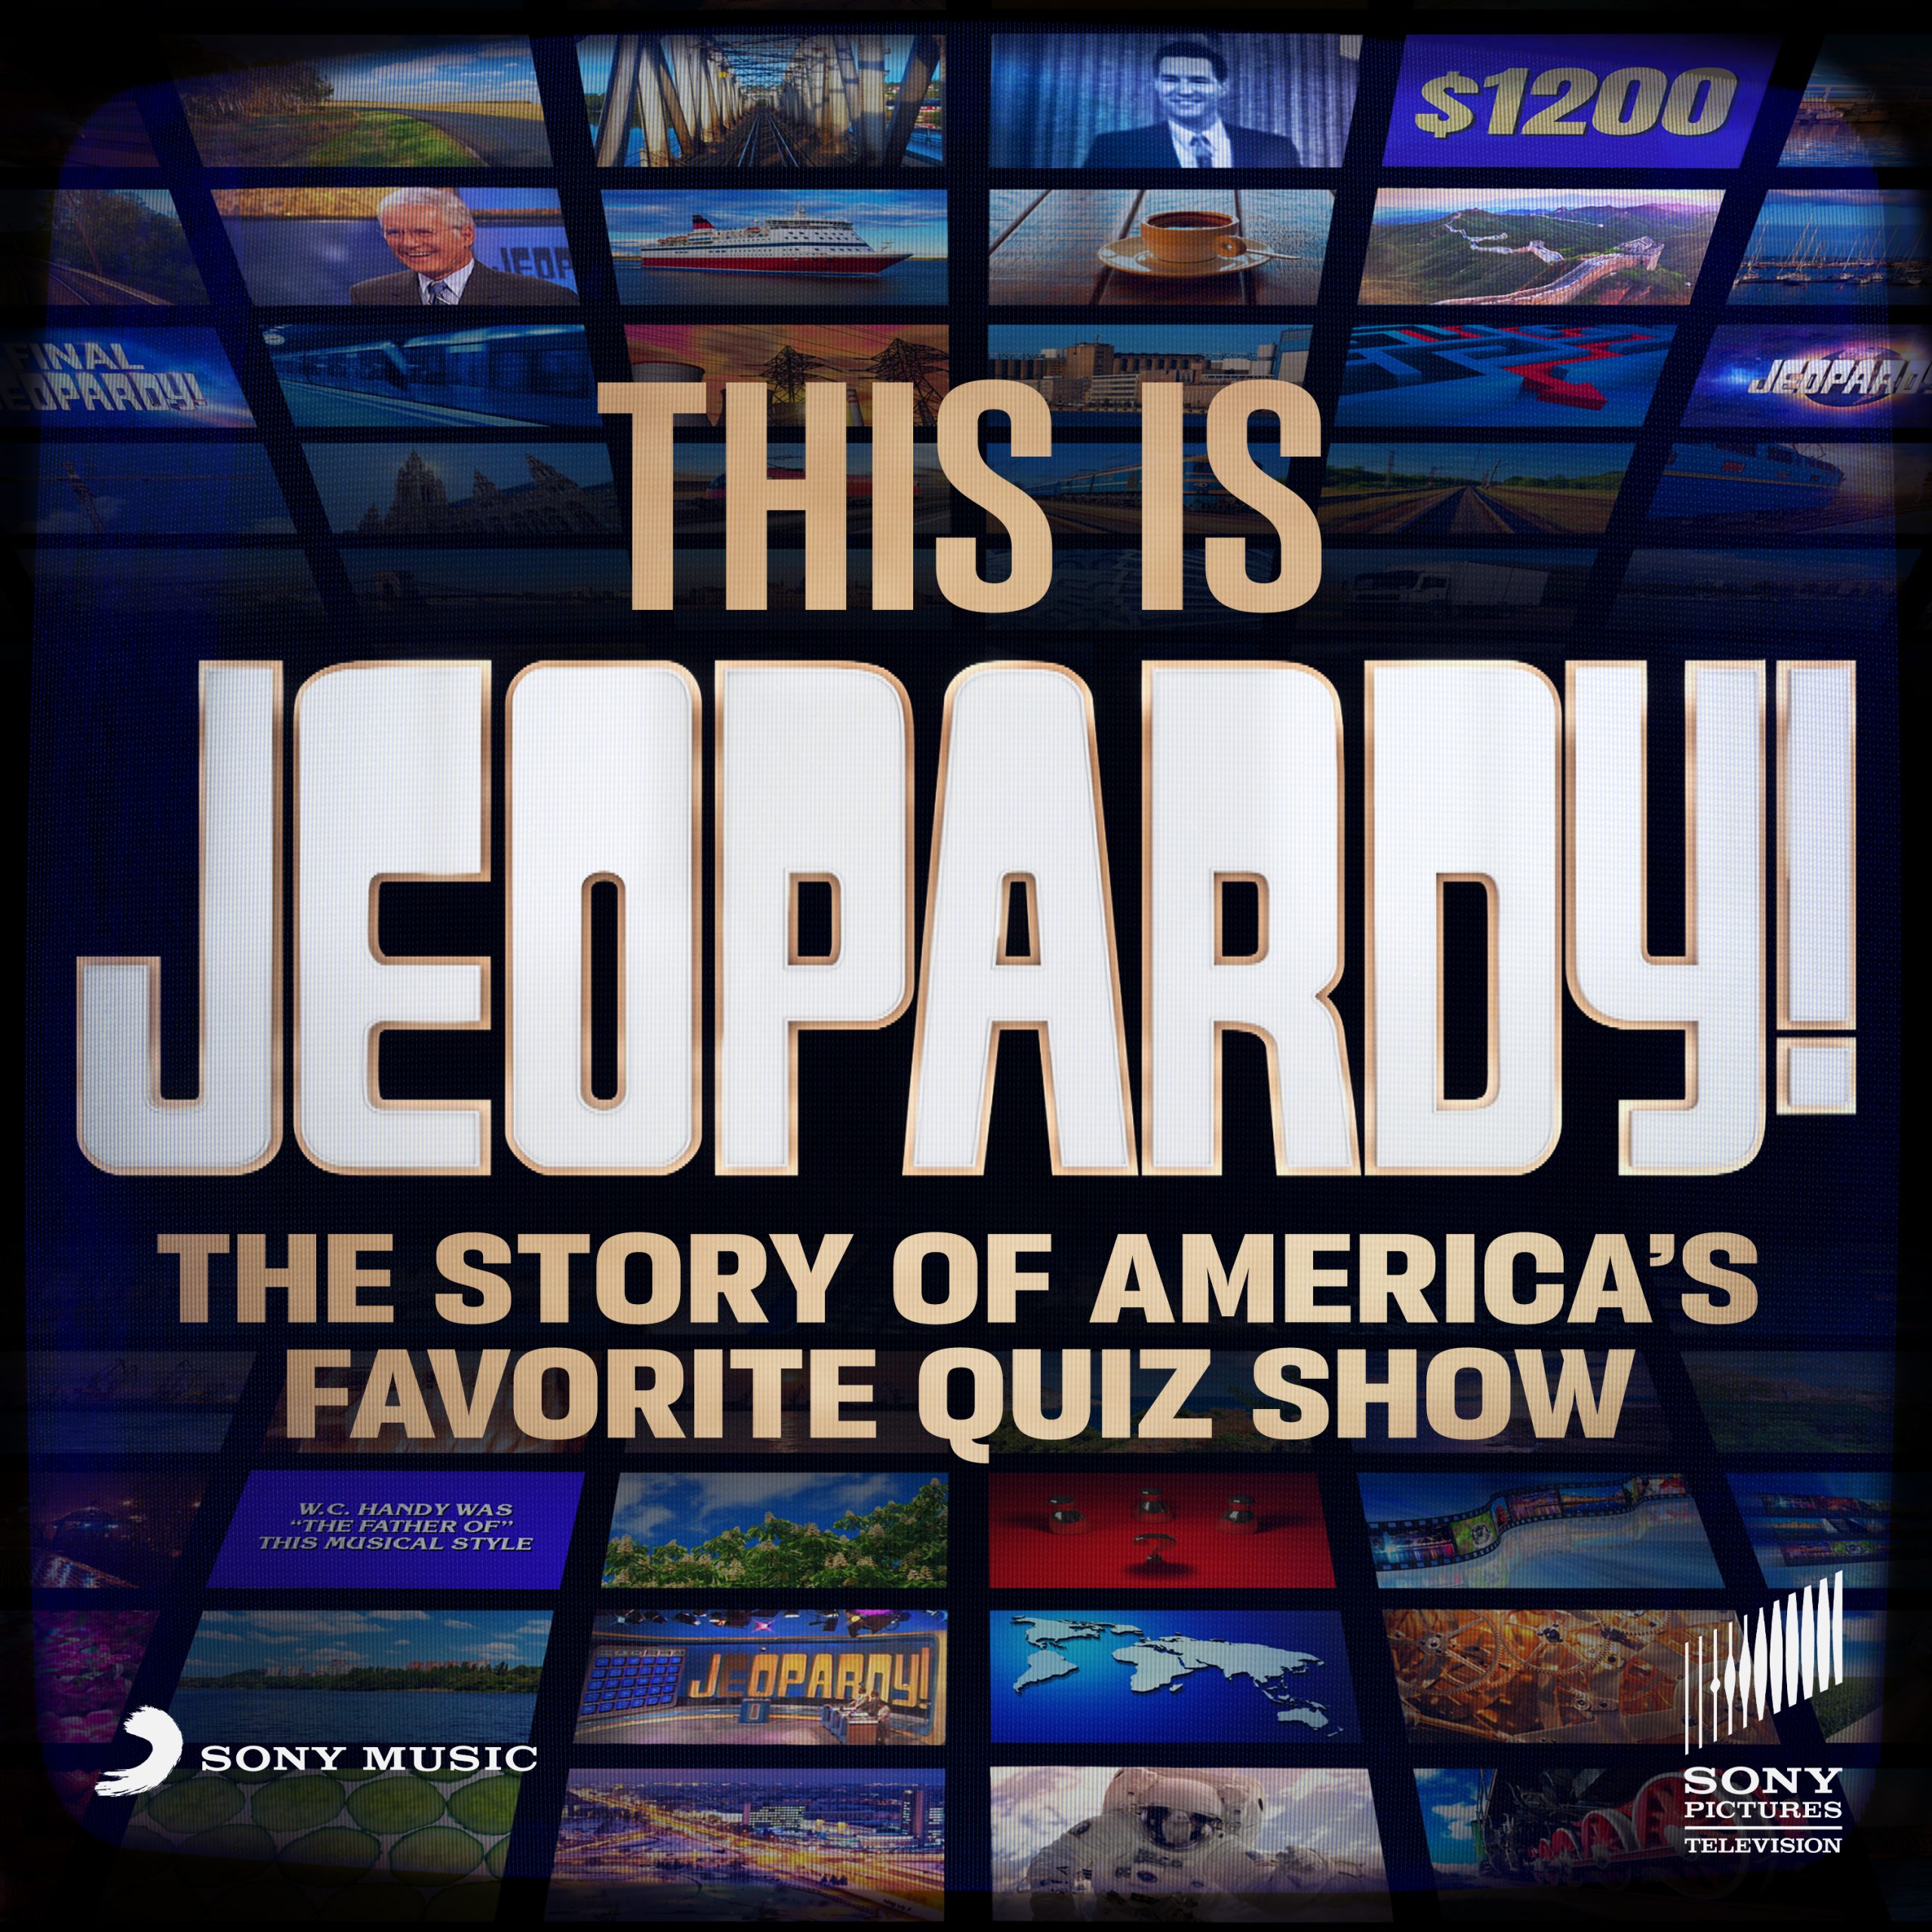 This is Jeopardy! The Story of America's Favorite Quiz Show